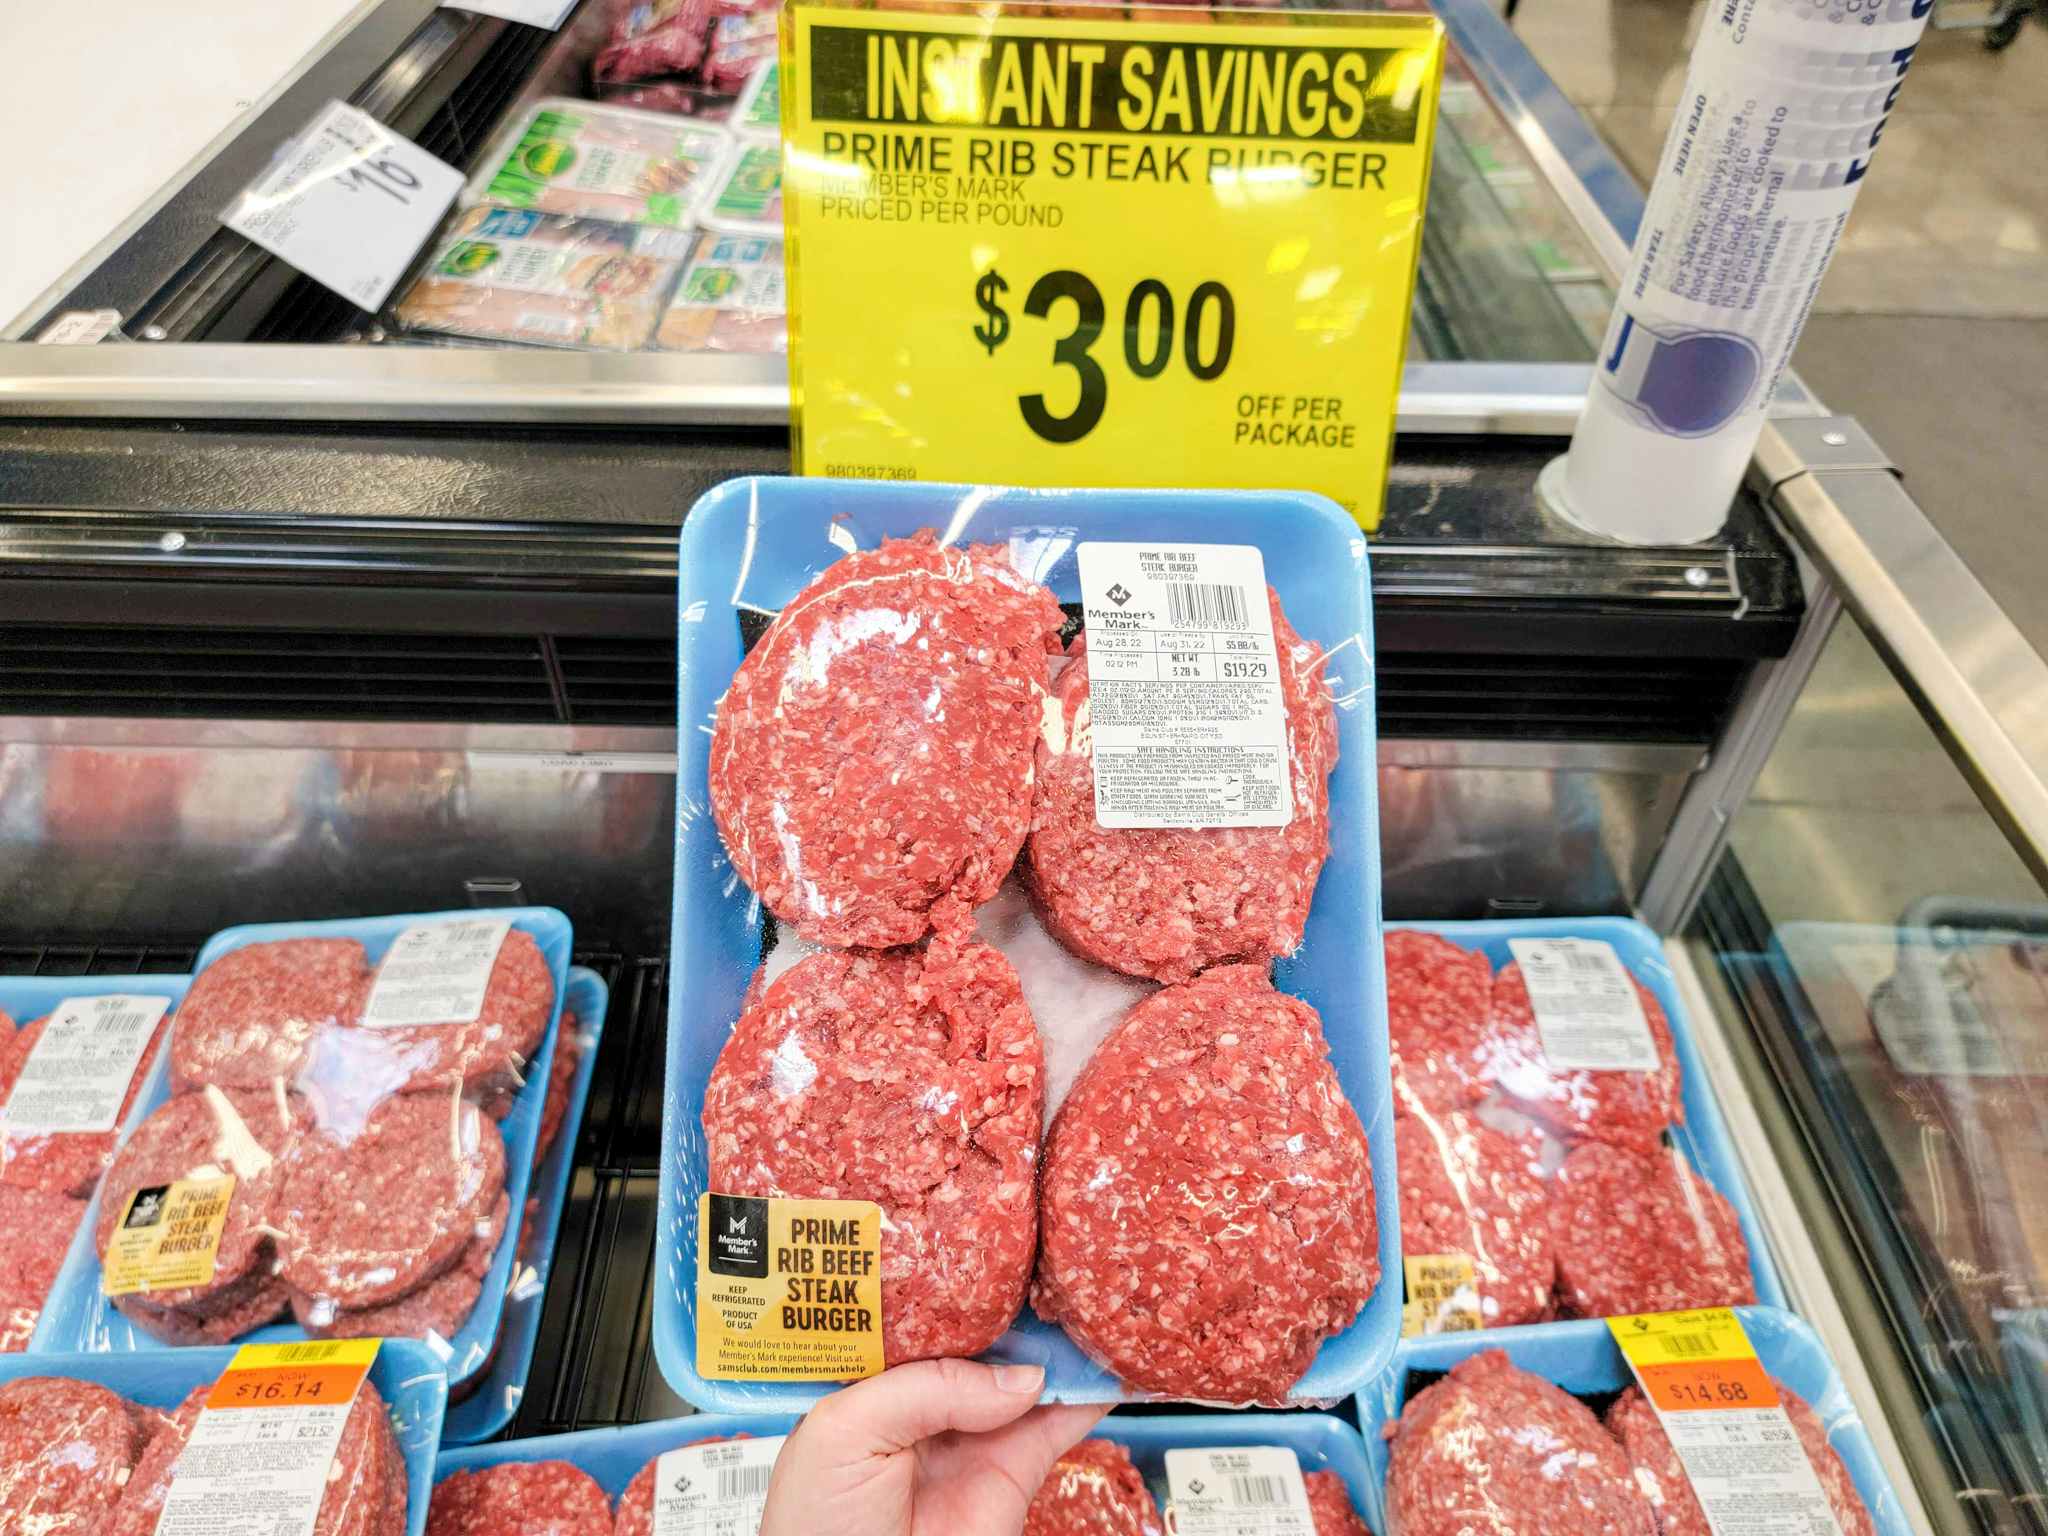 prime rib steak burgers with a sign for $3 off per pack